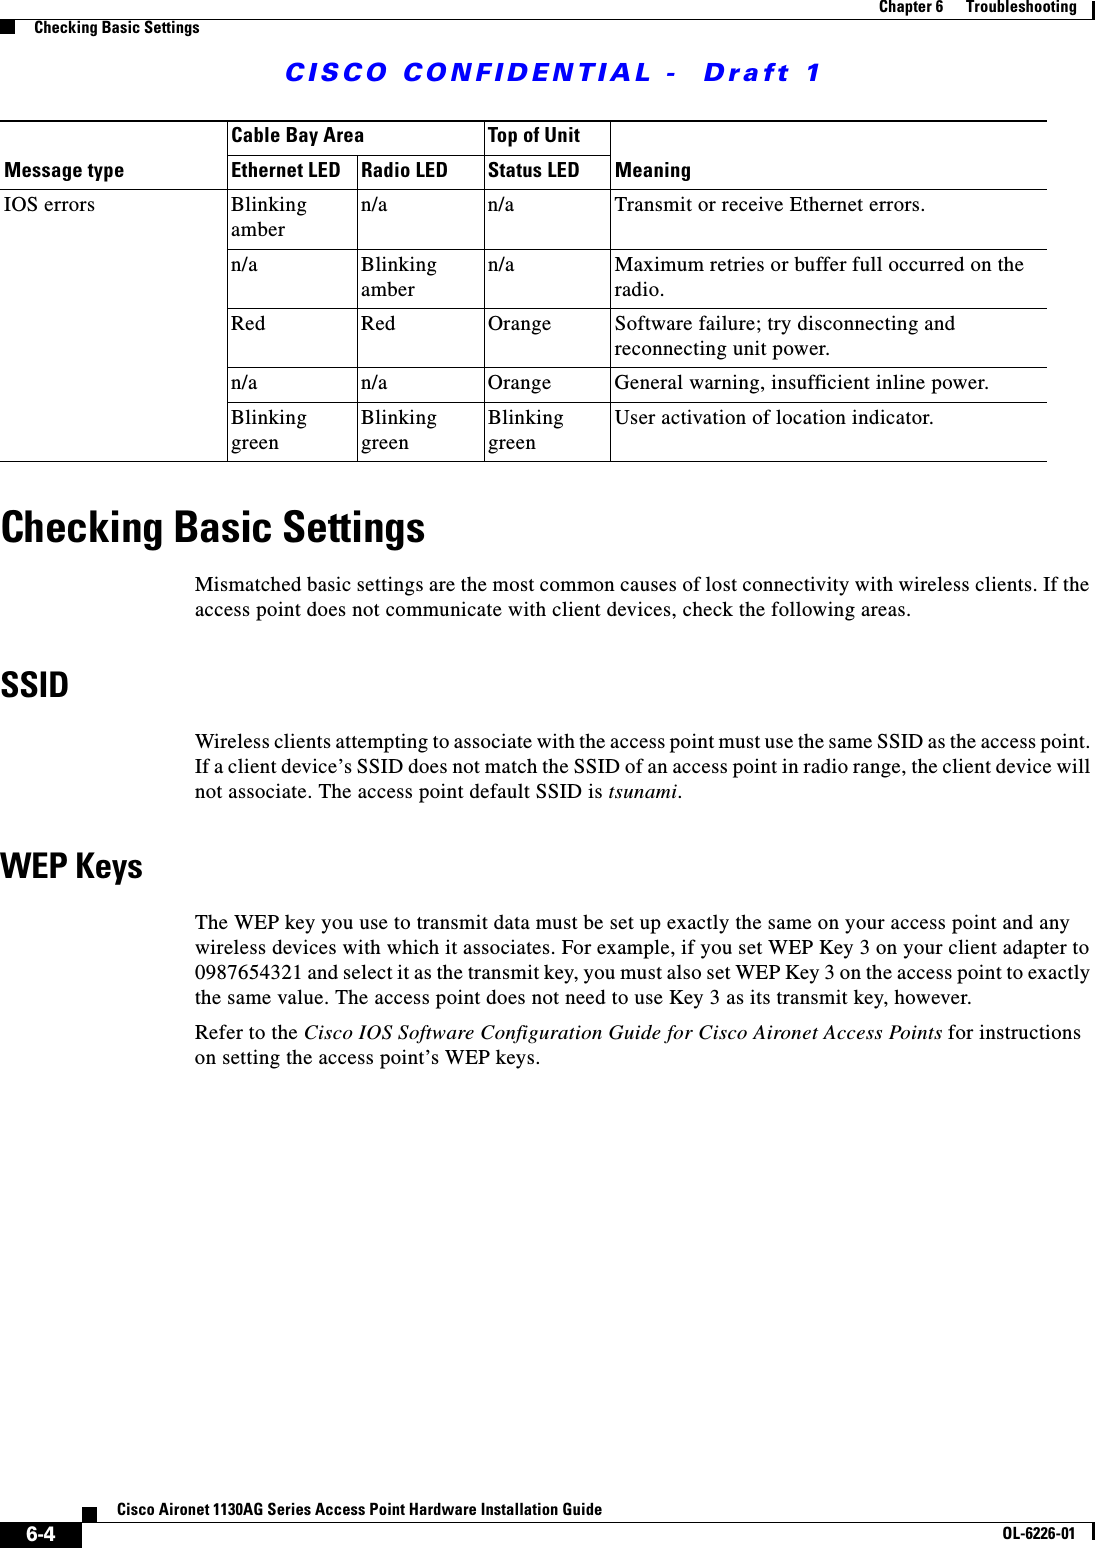  CISCO CONFIDENTIAL -  Draft 16-4Cisco Aironet 1130AG Series Access Point Hardware Installation GuideOL-6226-01Chapter 6      TroubleshootingChecking Basic SettingsChecking Basic SettingsMismatched basic settings are the most common causes of lost connectivity with wireless clients. If the access point does not communicate with client devices, check the following areas.SSIDWireless clients attempting to associate with the access point must use the same SSID as the access point. If a client device’s SSID does not match the SSID of an access point in radio range, the client device will not associate. The access point default SSID is tsunami.WEP KeysThe WEP key you use to transmit data must be set up exactly the same on your access point and any wireless devices with which it associates. For example, if you set WEP Key 3 on your client adapter to 0987654321 and select it as the transmit key, you must also set WEP Key 3 on the access point to exactly the same value. The access point does not need to use Key 3 as its transmit key, however.Refer to the Cisco IOS Software Configuration Guide for Cisco Aironet Access Points for instructions on setting the access point’s WEP keys.IOS errors Blinking ambern/a n/a Transmit or receive Ethernet errors. n/a Blinking ambern/a Maximum retries or buffer full occurred on the radio.Red Red Orange Software failure; try disconnecting and reconnecting unit power.n/a n/a Orange General warning, insufficient inline power.Blinking greenBlinking greenBlinking greenUser activation of location indicator.Message typeCable Bay Area Top of UnitMeaningEthernet LED Radio LED Status LED